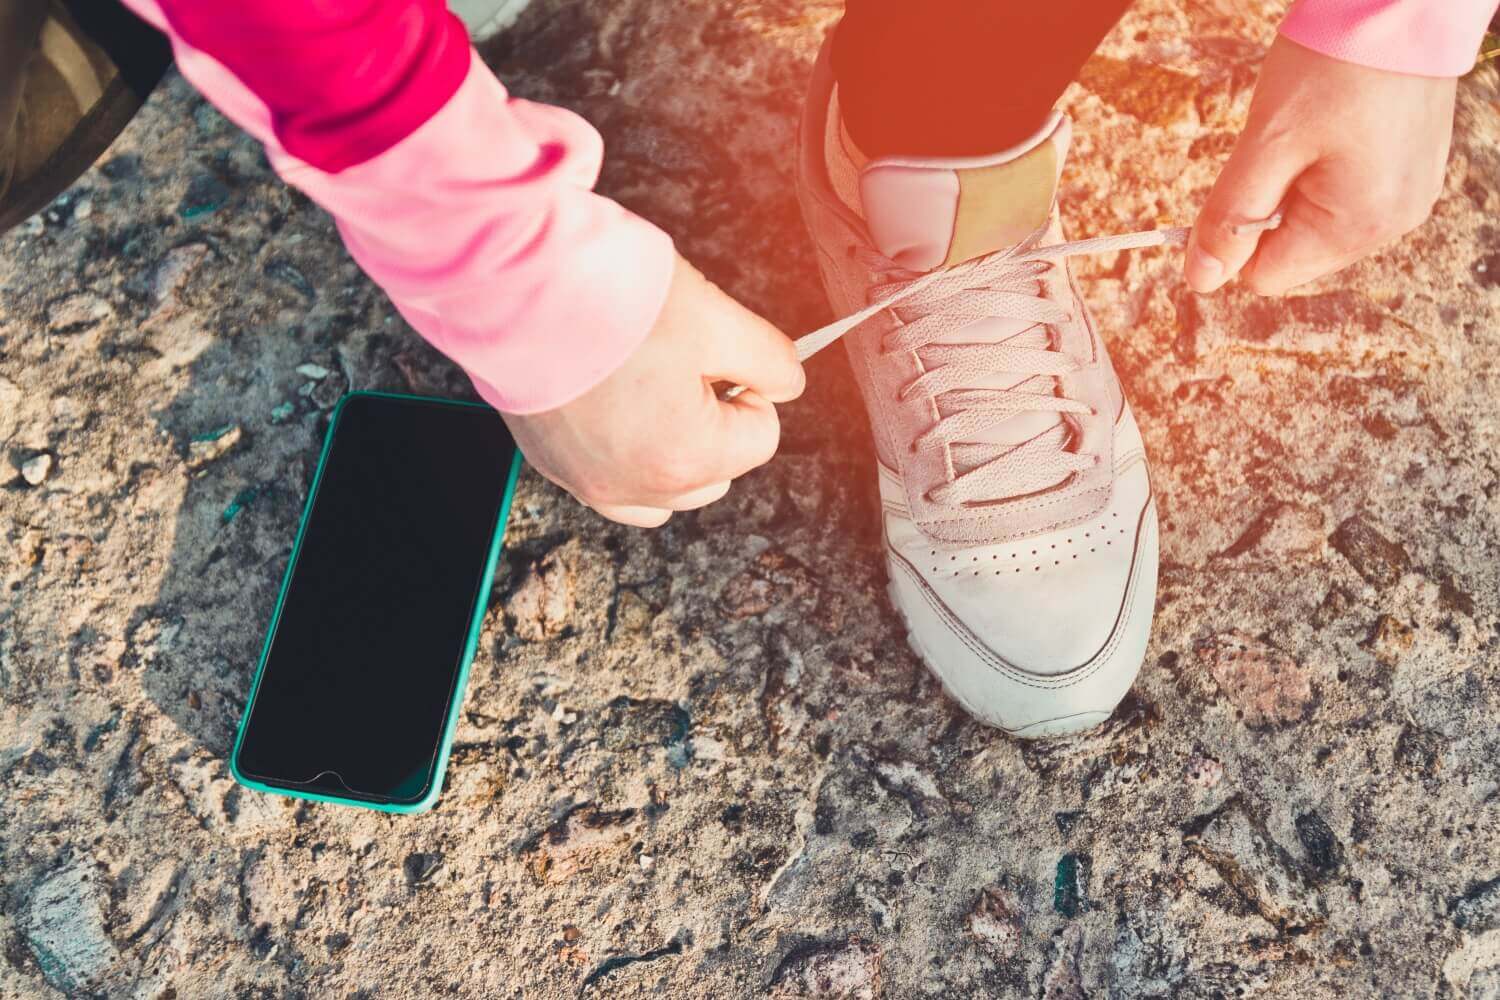 Google is shutting down experimental social network Shoelace